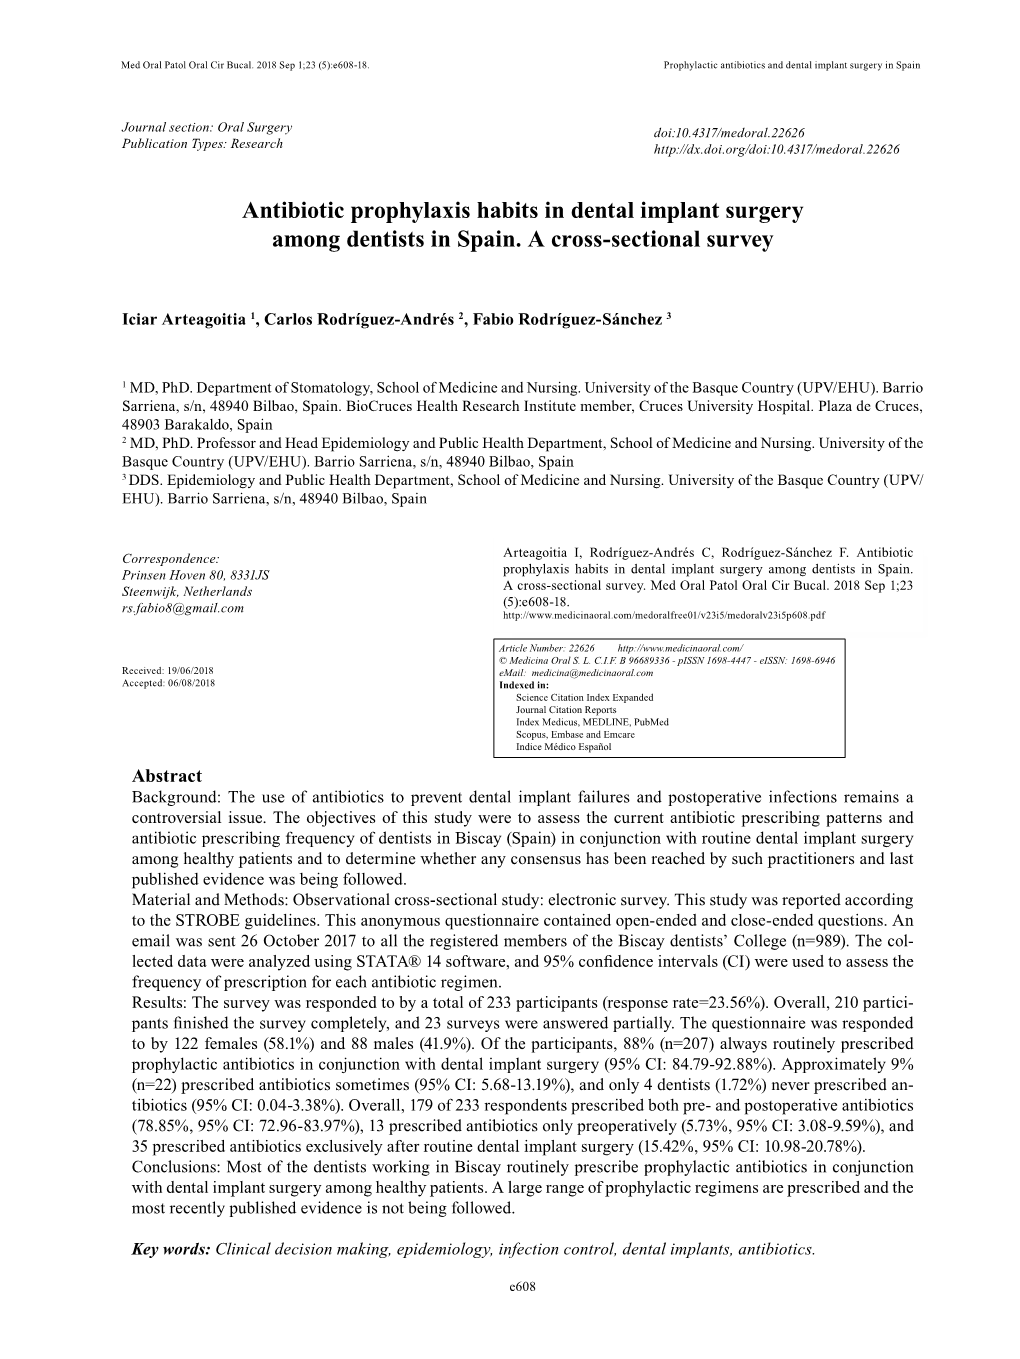 Antibiotic Prophylaxis Habits in Dental Implant Surgery Among Dentists in Spain. a Cross-Sectional Survey